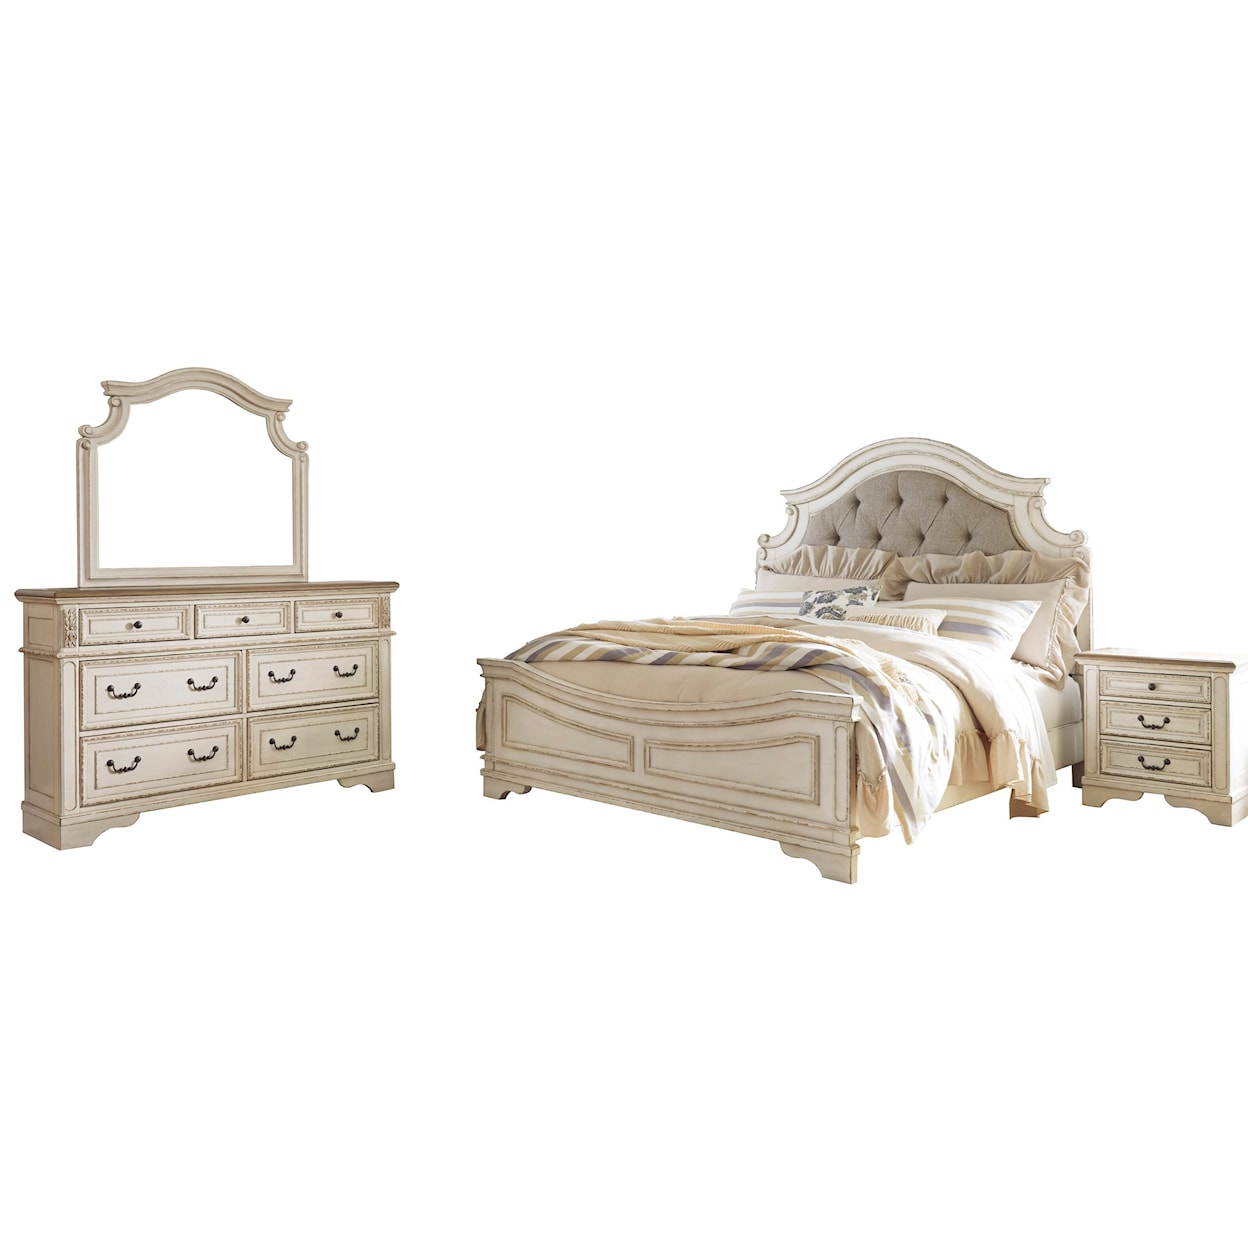 Signature Design by Ashley Realyn 6pc King Bedroom Group